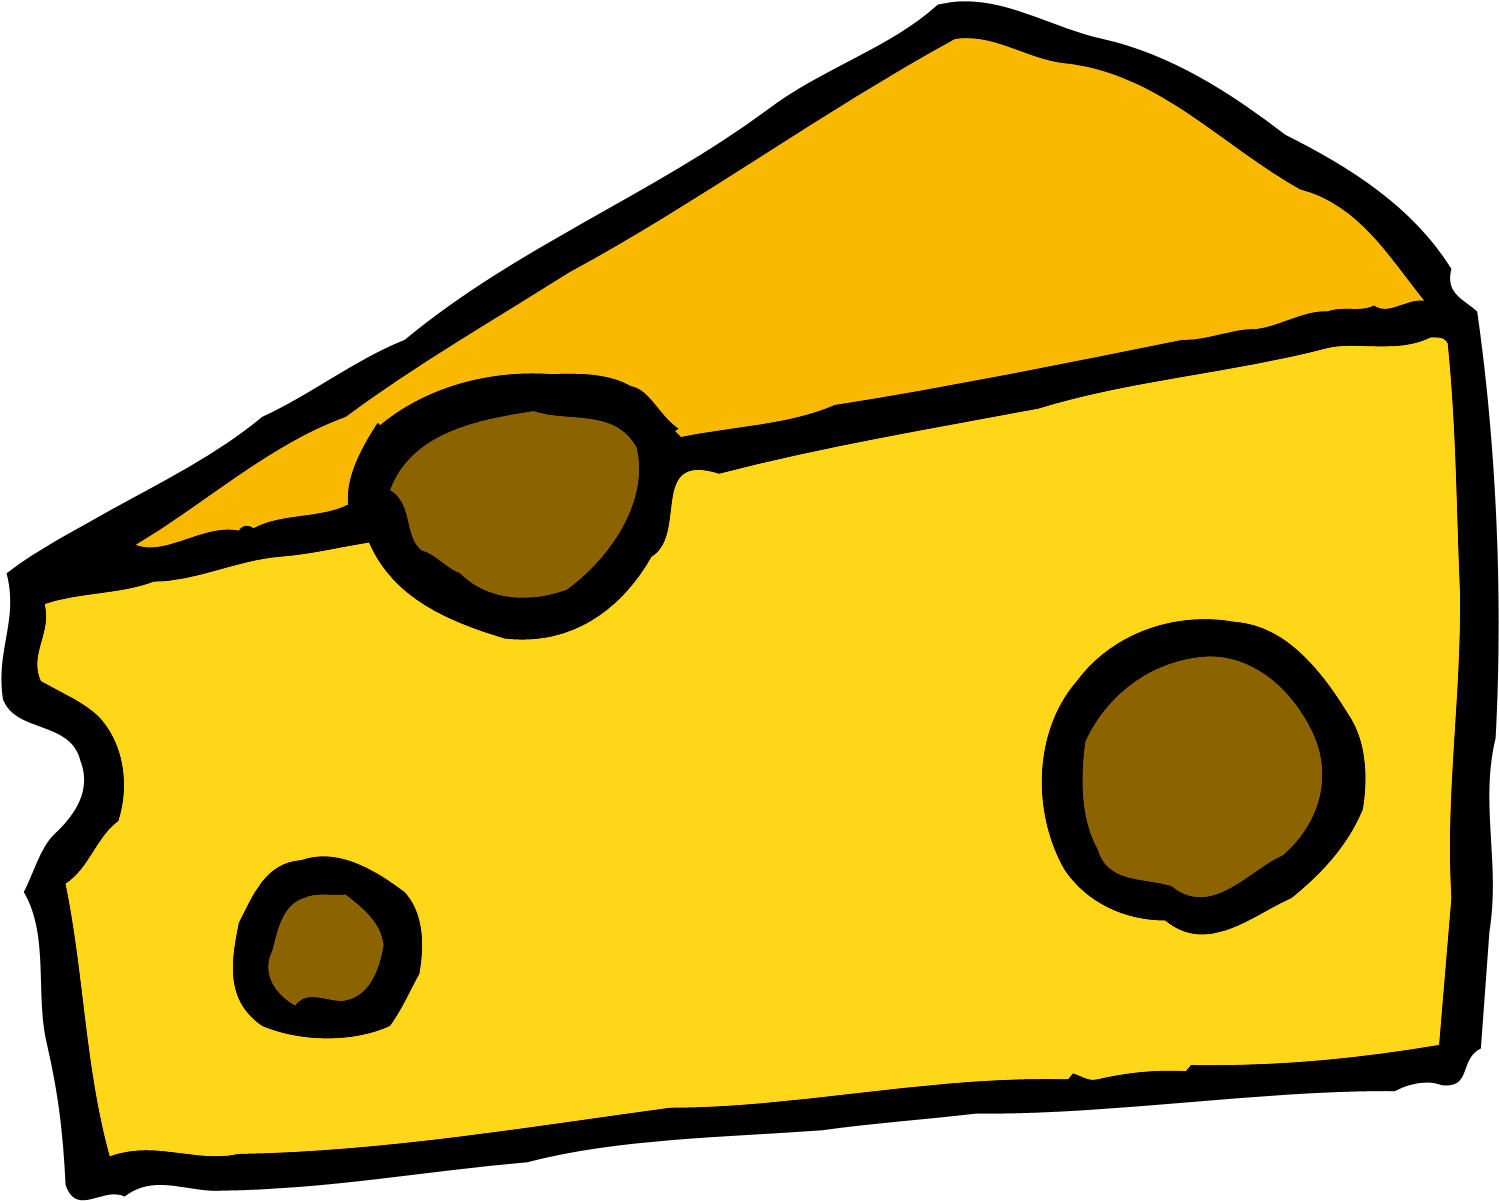 The Cheese Cartoon Transparent Background